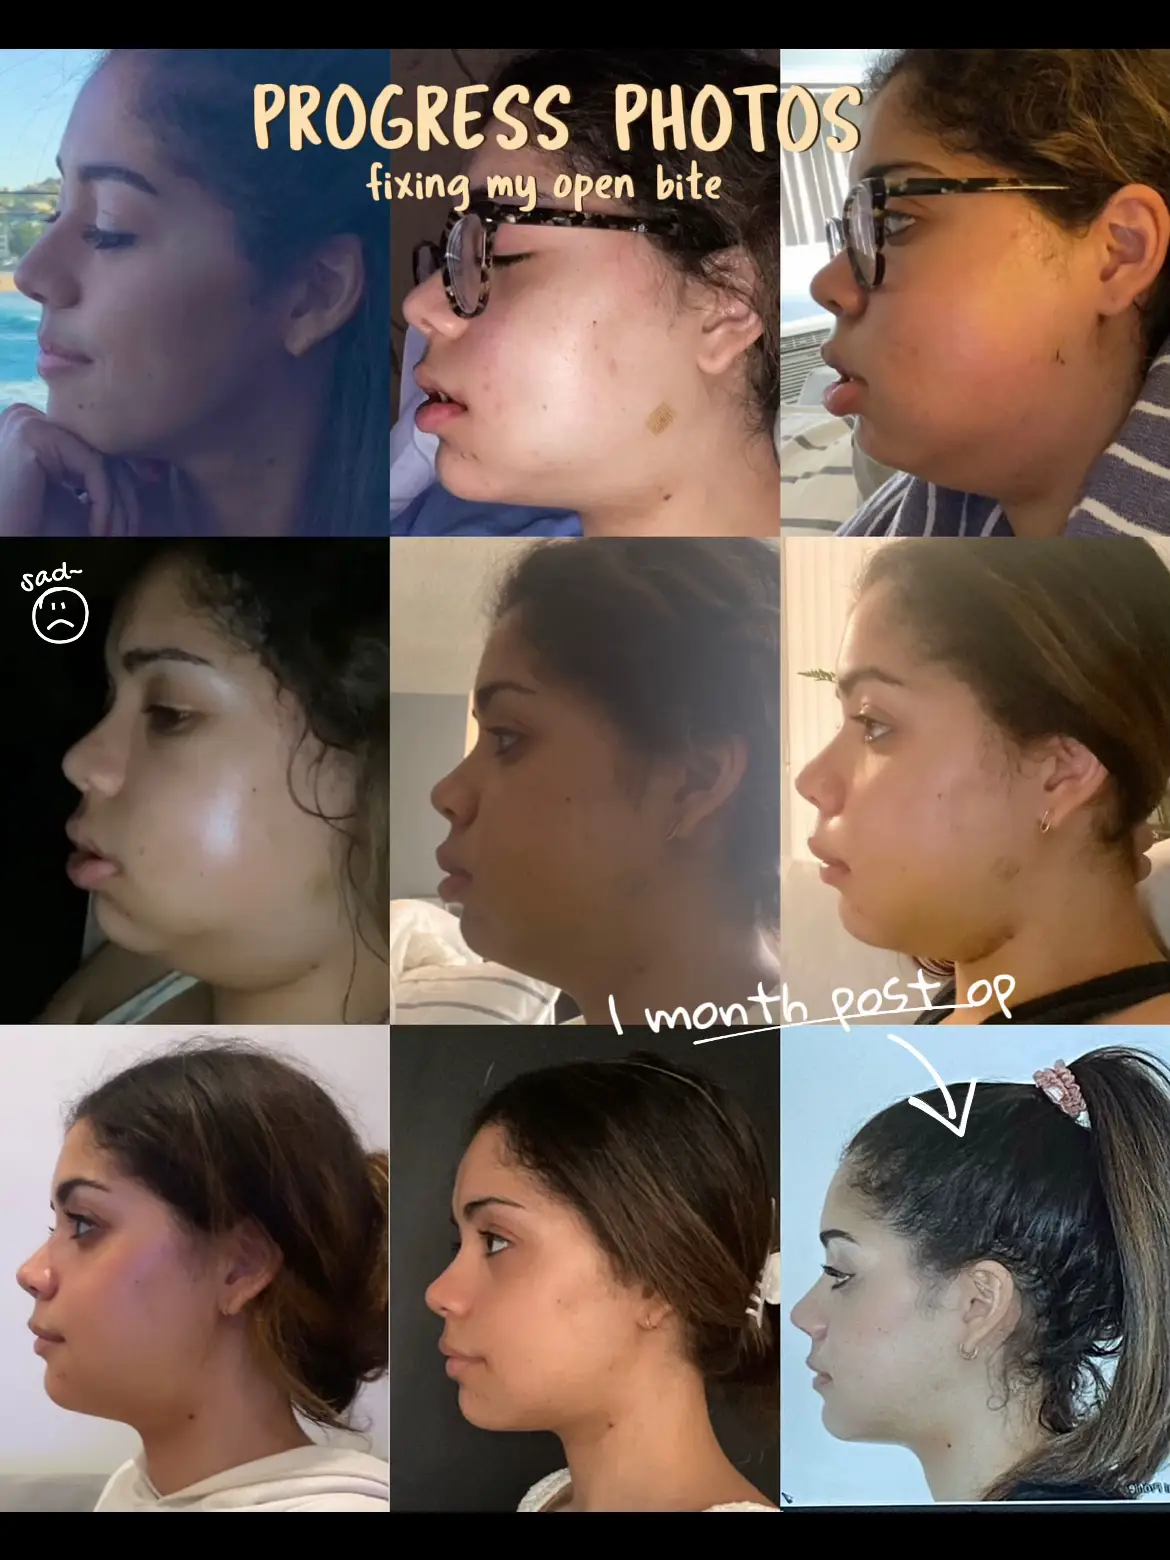 Jaw Surgery for Bite Correction - Lemon8 Search